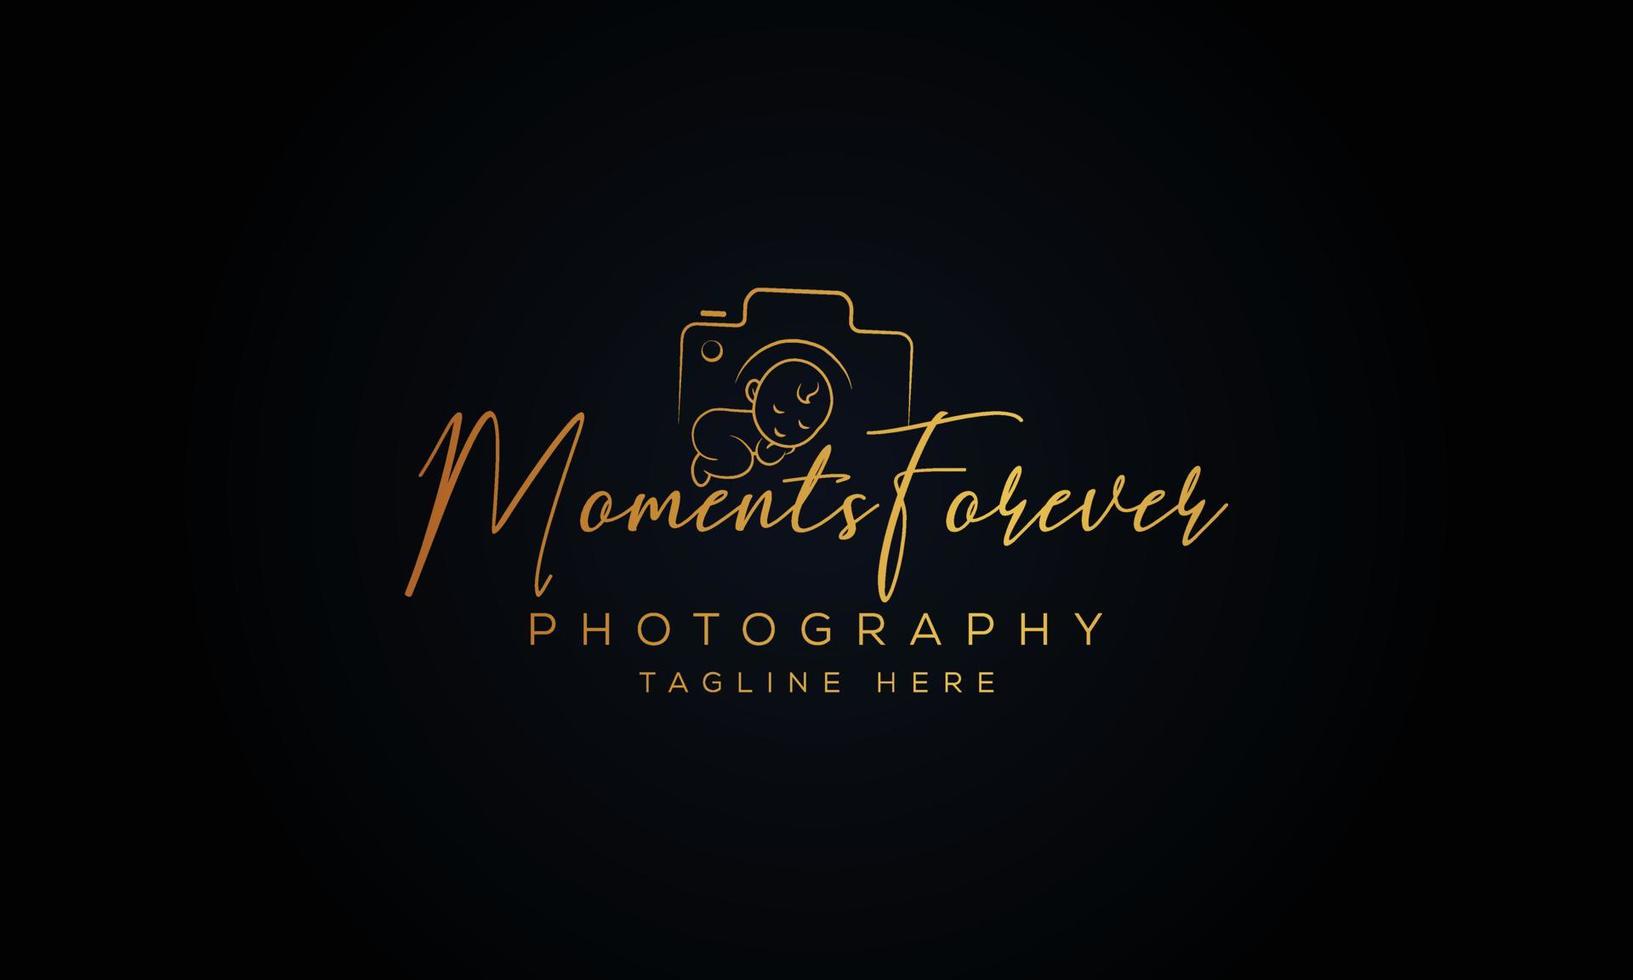 Photography Typography Signature Logo of the photographer. camera shutter. The abstract symbol for a Photo Studio in a simple minimalistic style. Vector logo template for a wedding photographer